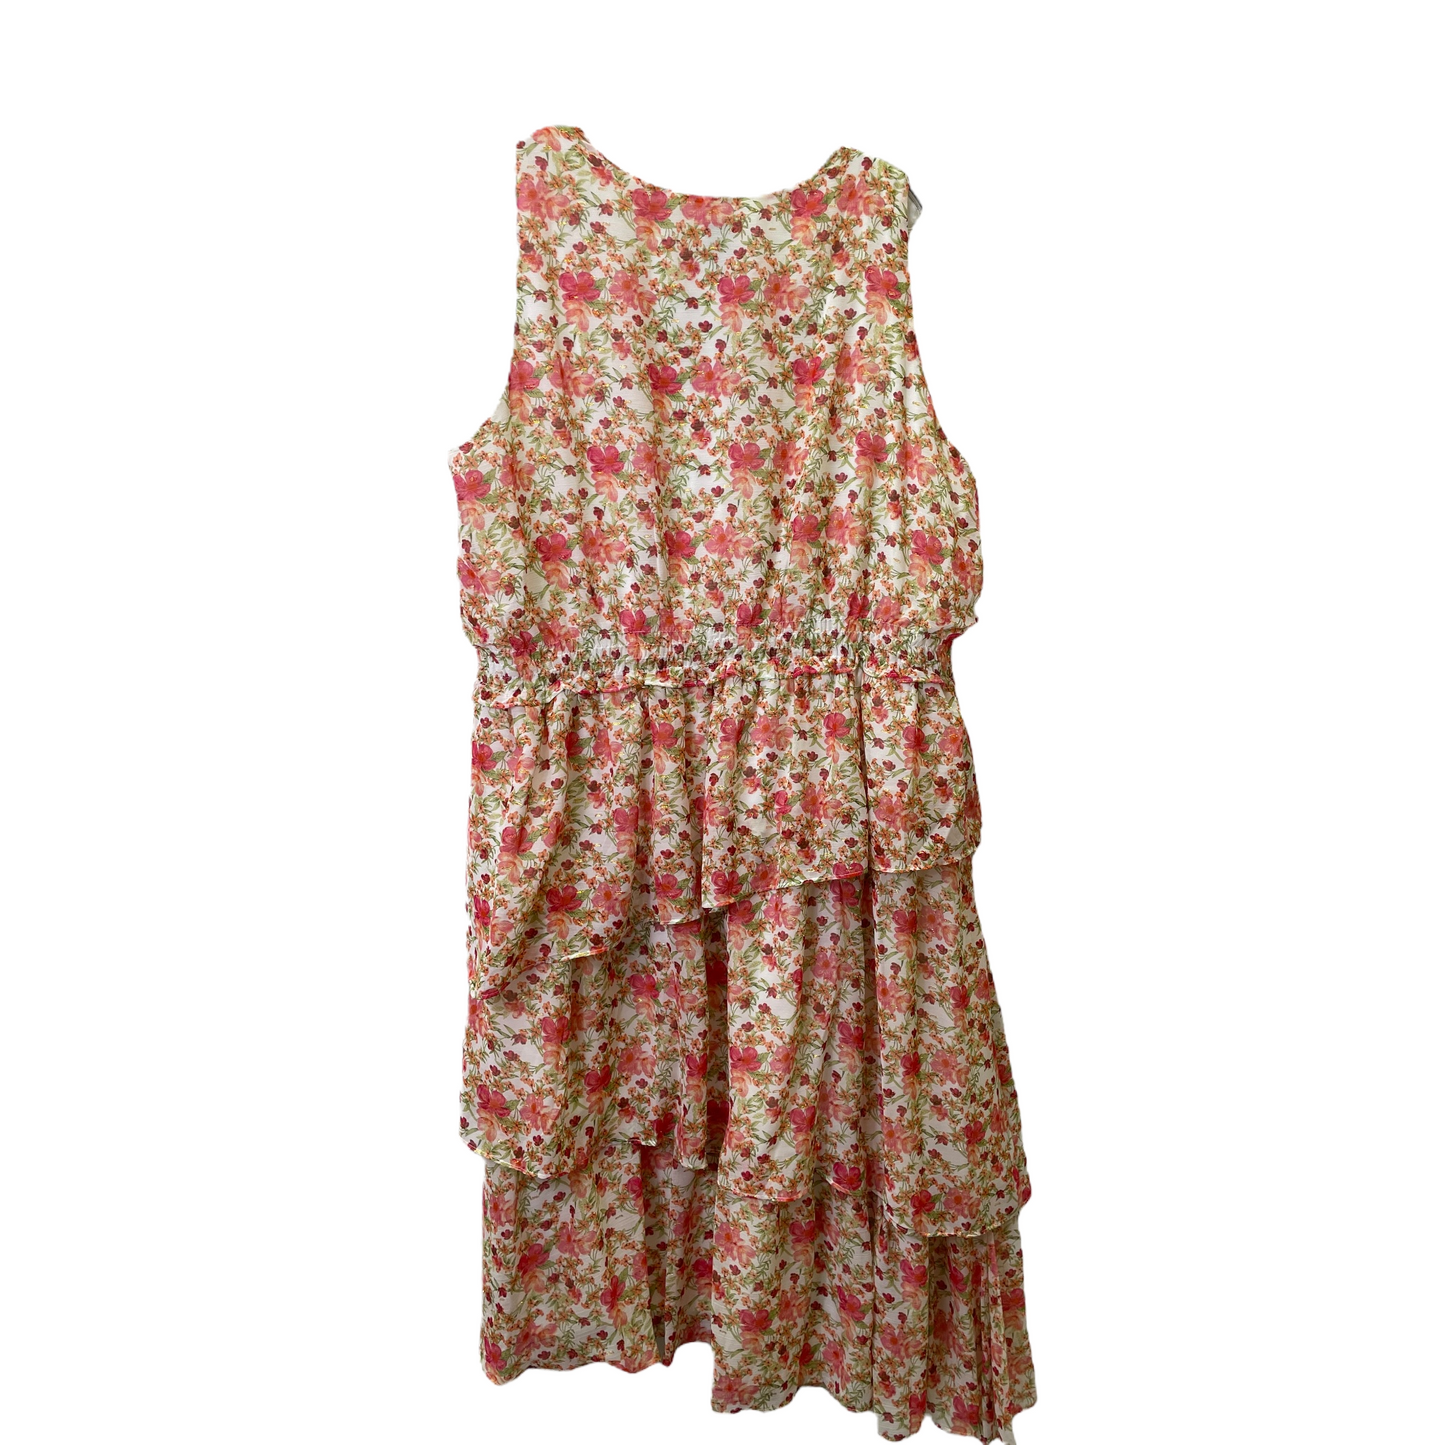 Coral Dress Casual Maxi By Taylor, Size: 2x